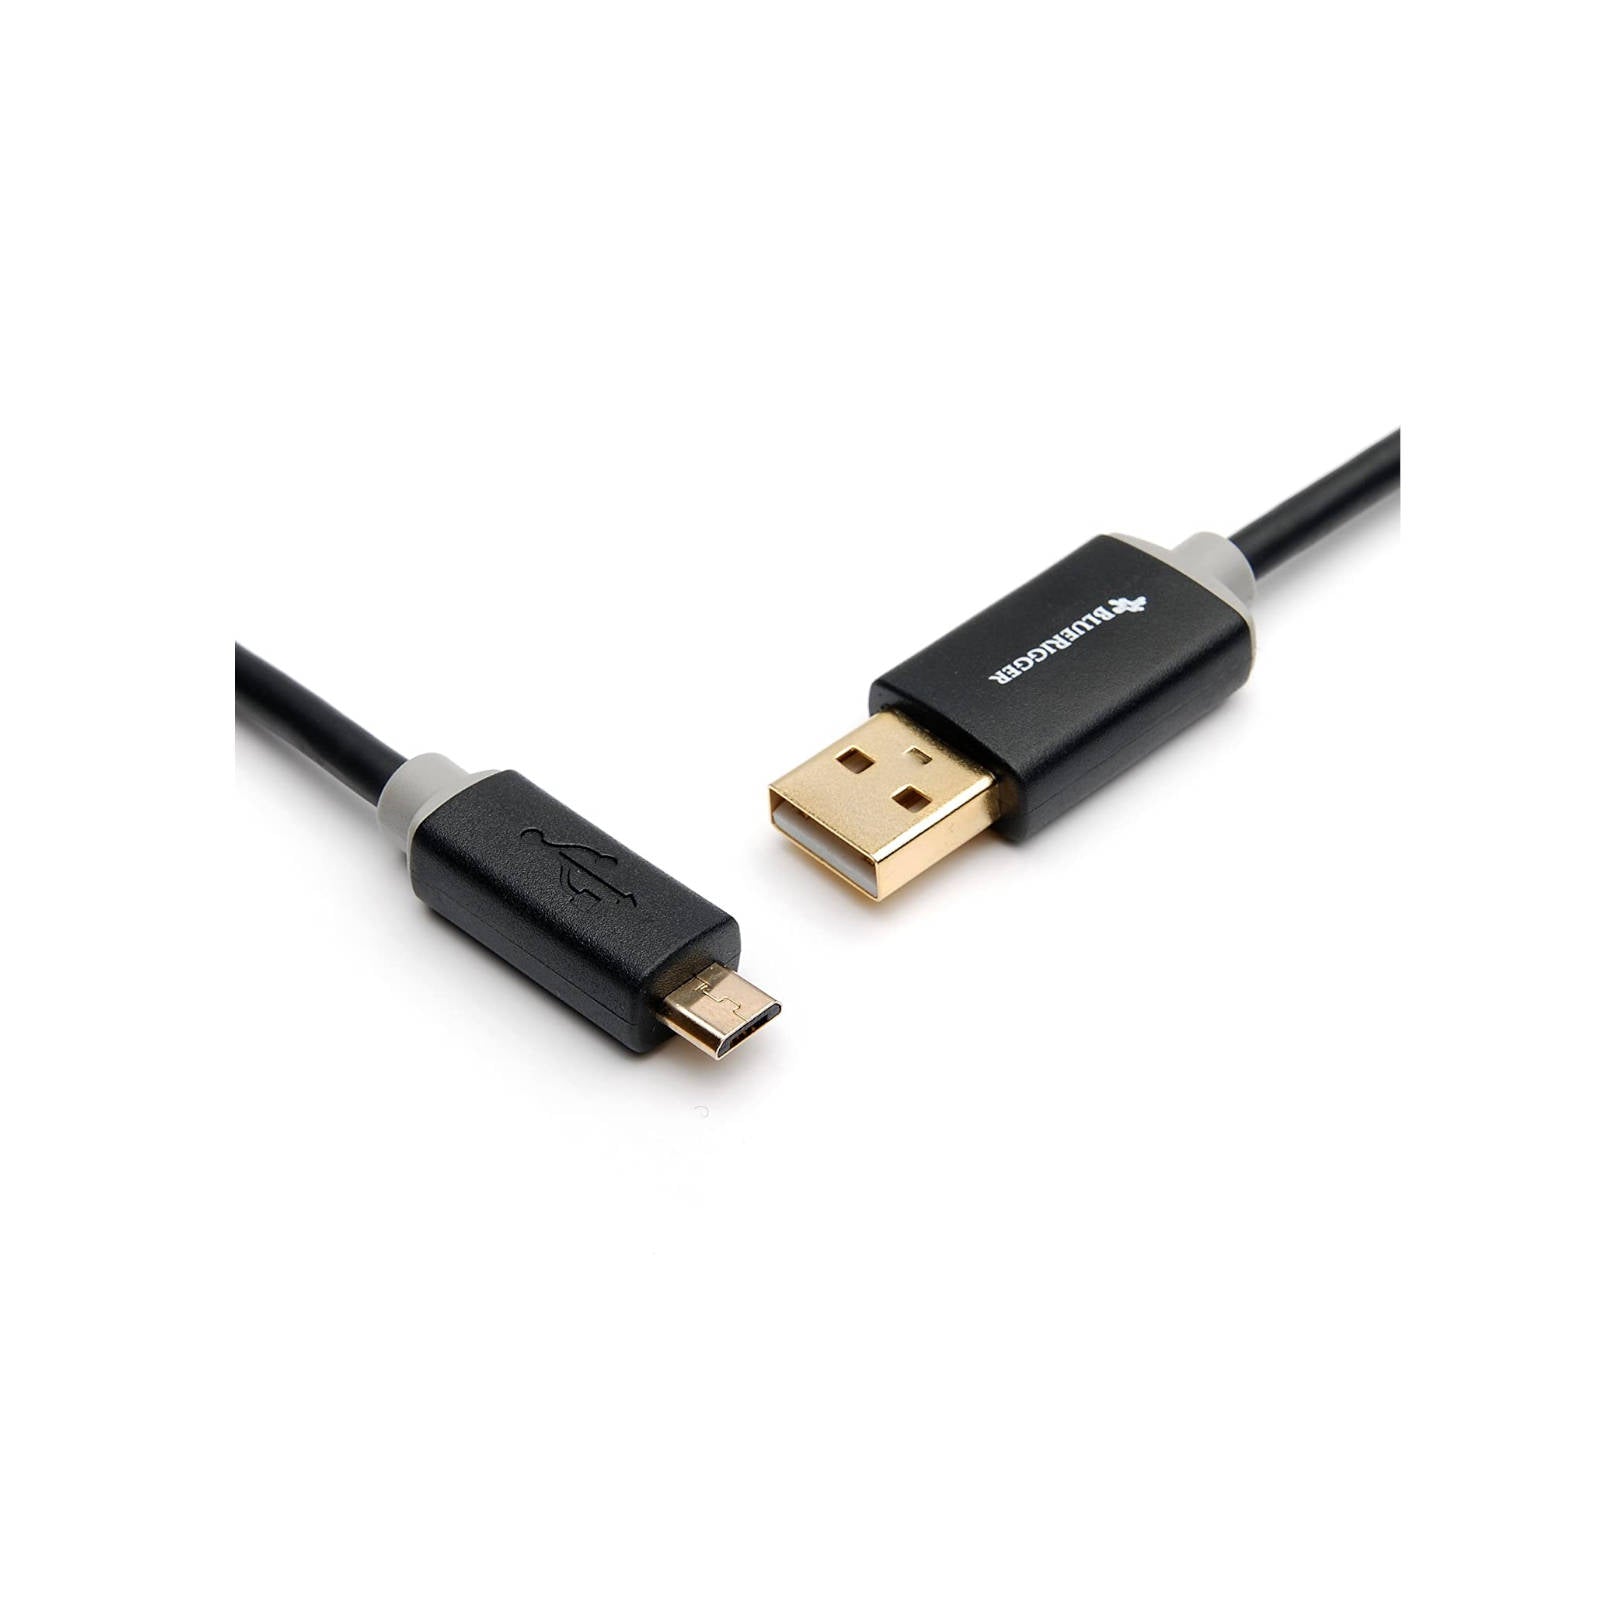 BlueRigger Premium Micro USB Cable for Smartphones, Tablets and other devices - Black (3ft /6ft) - Ooberpad